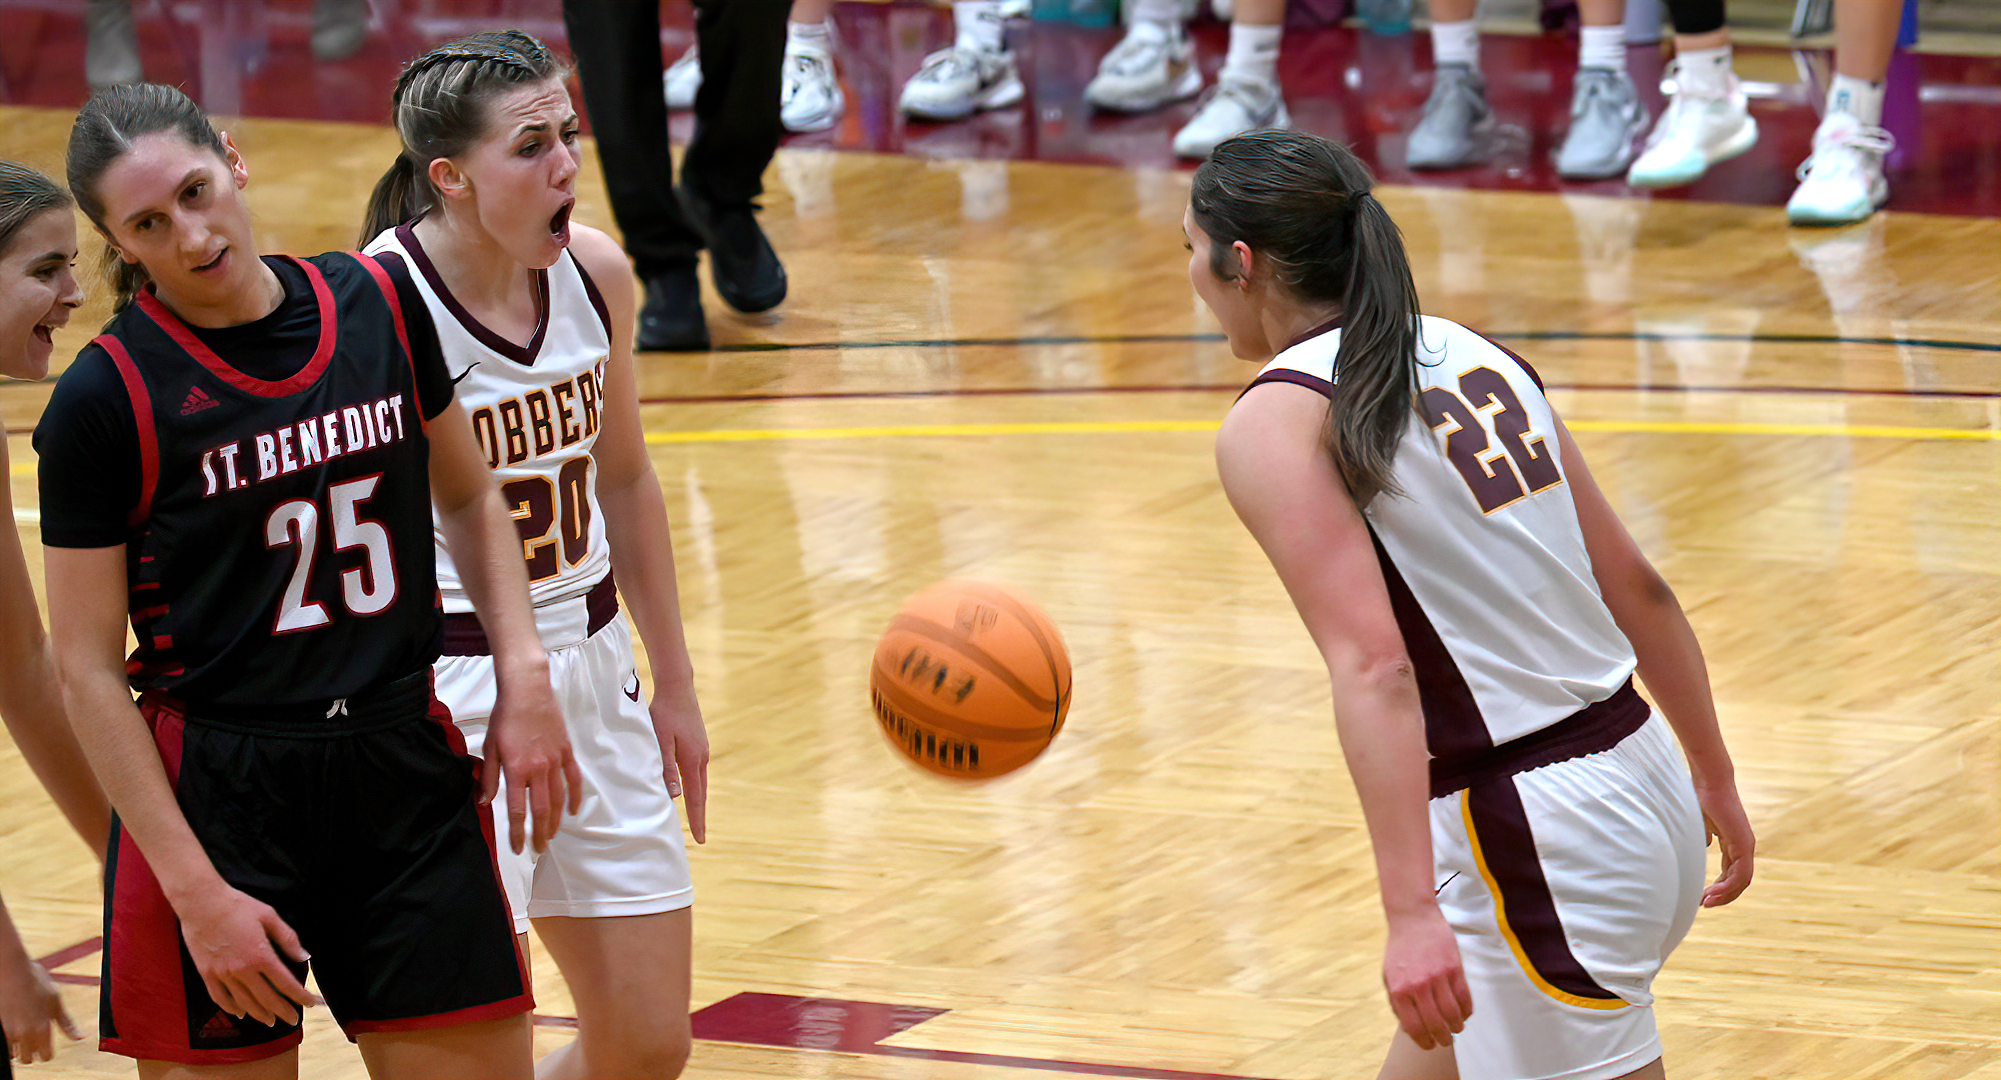 Concordia outscored St. Benedict 40-22 in points in the paint on their way to a season sweep over the Bennies.